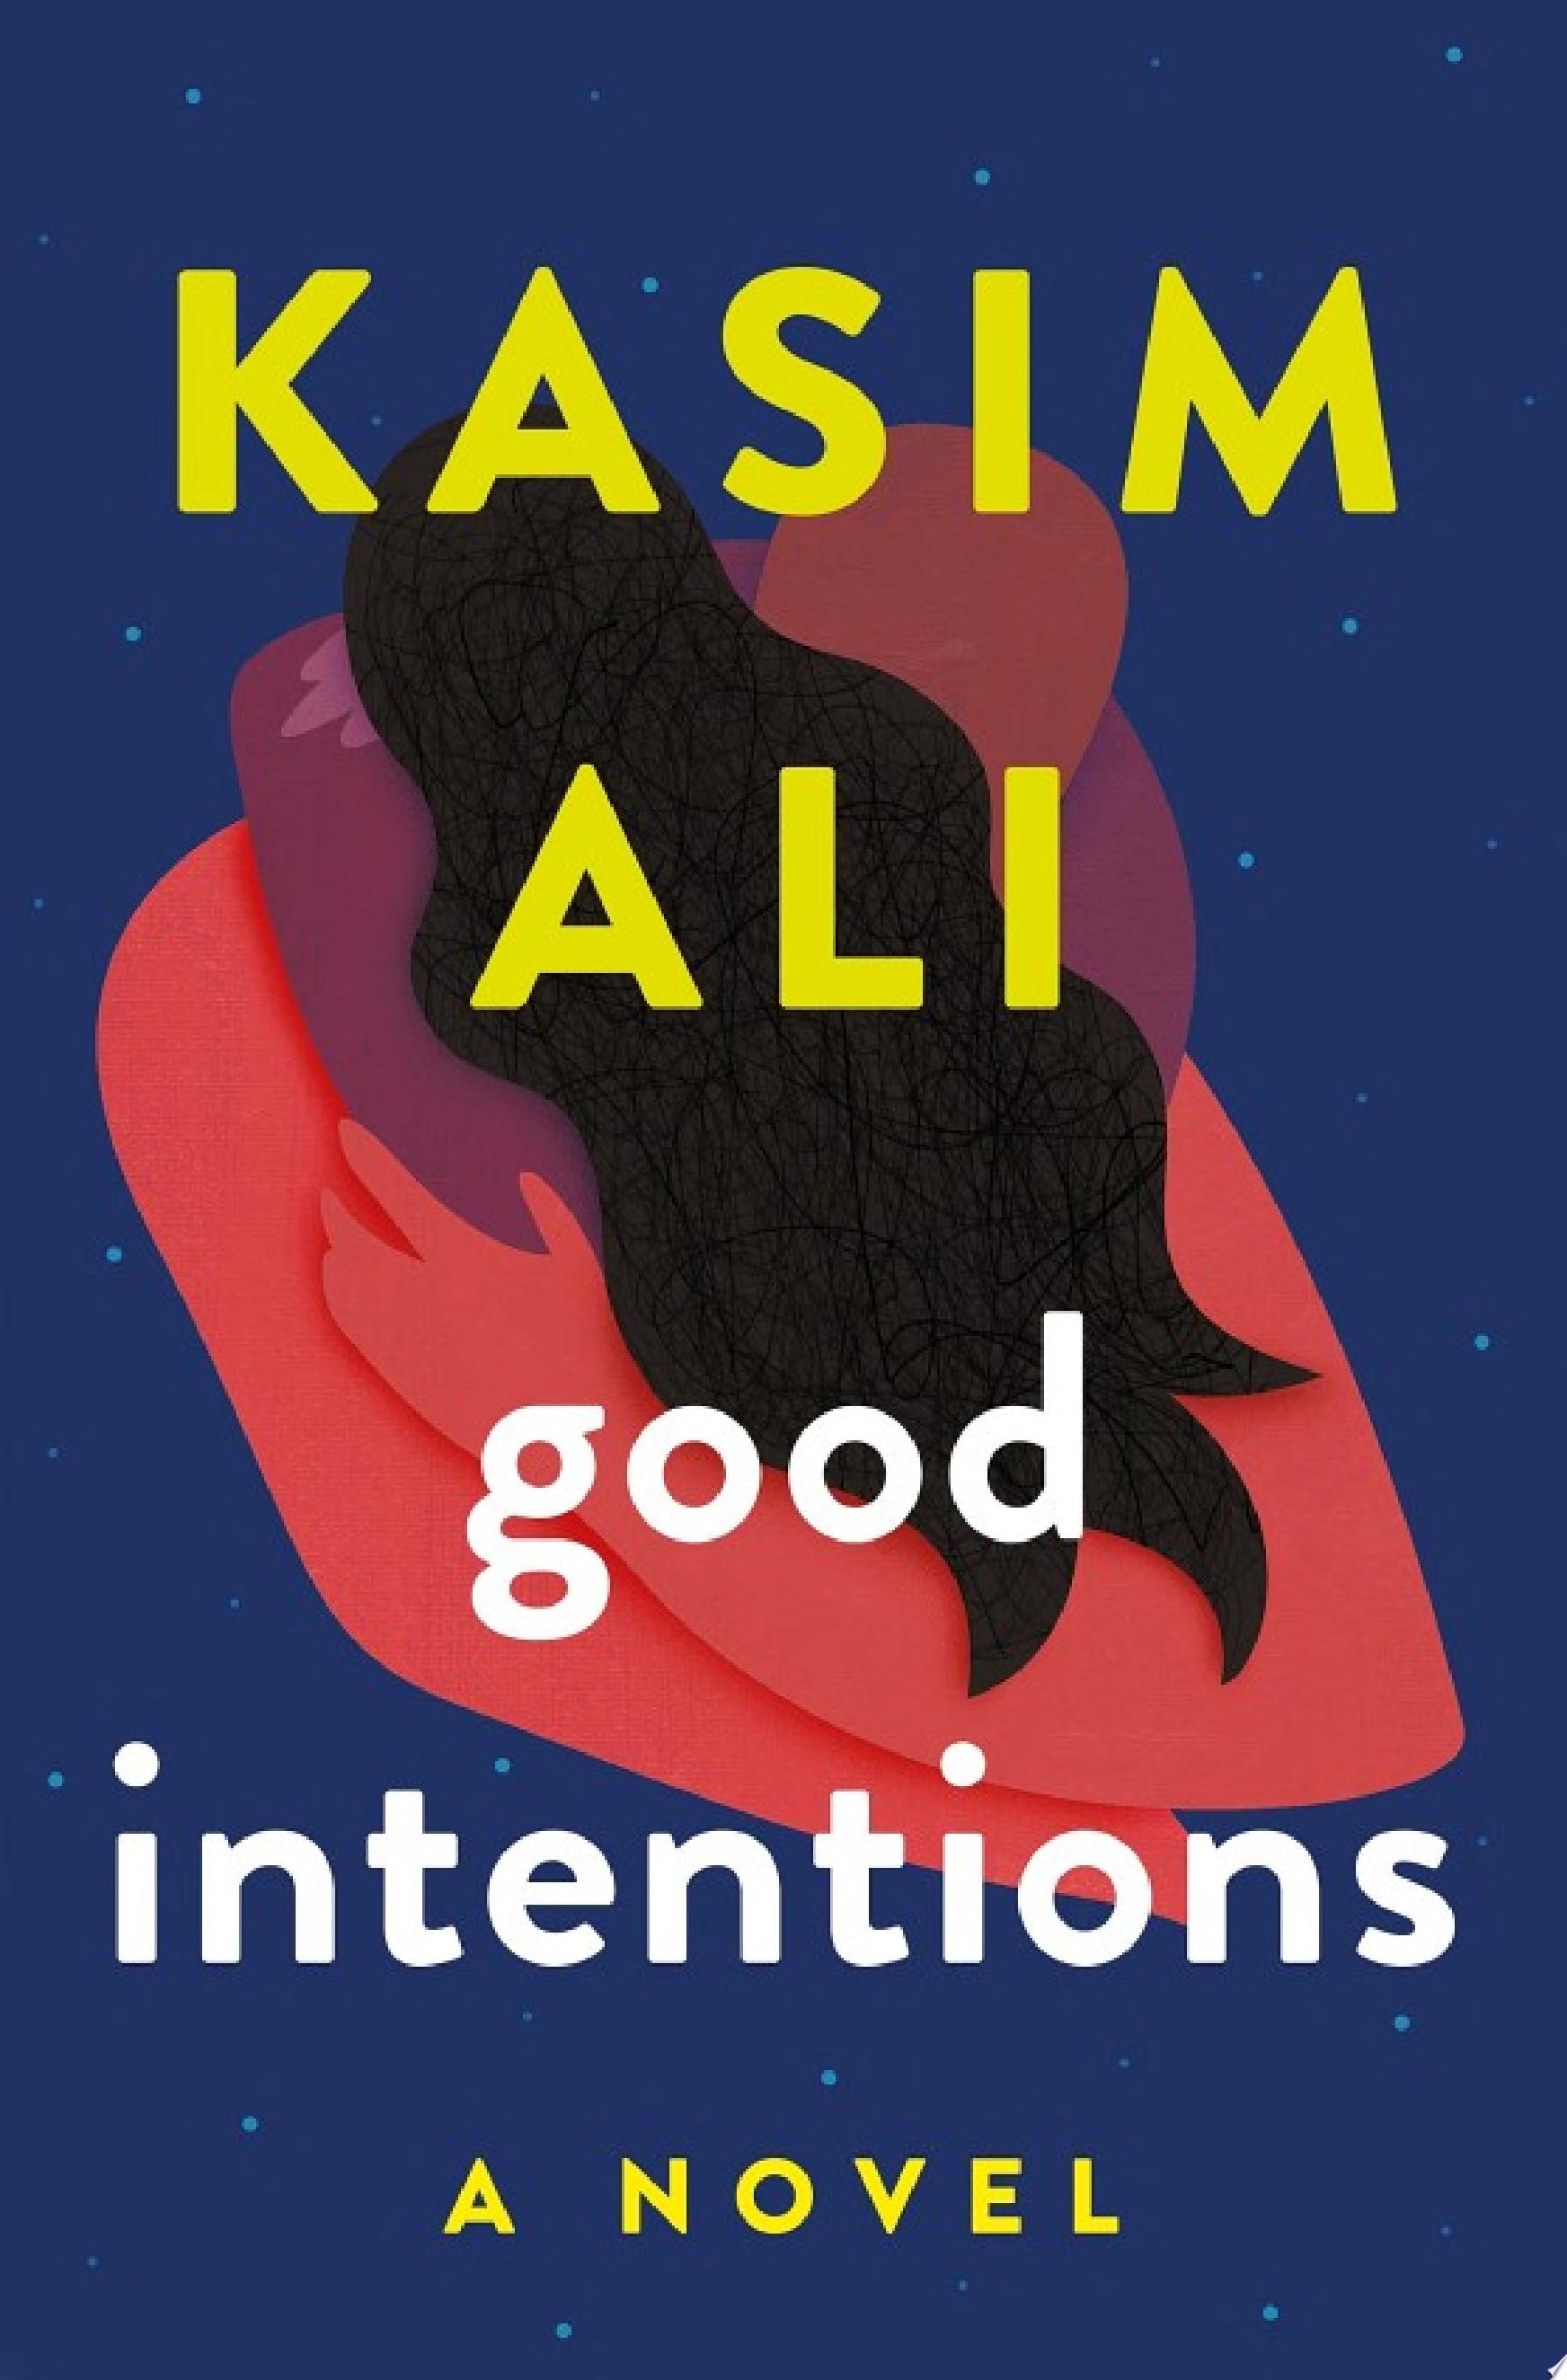 Image for "Good Intentions"